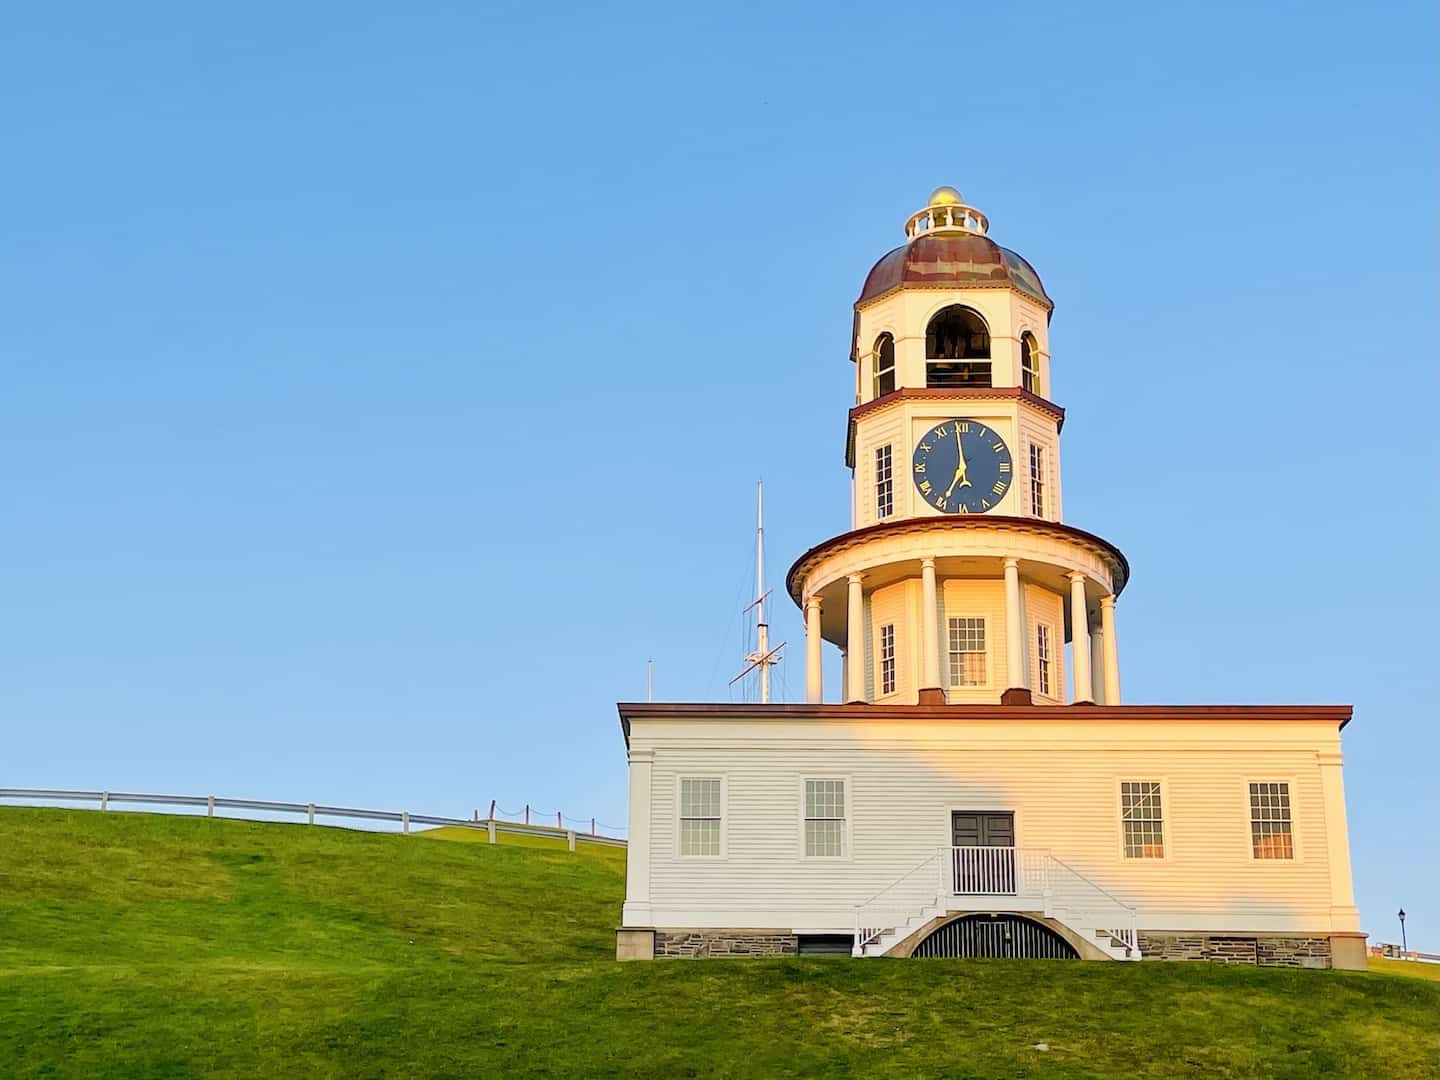 A large clock with a cupola sits on a building near the Halifax Citadel.